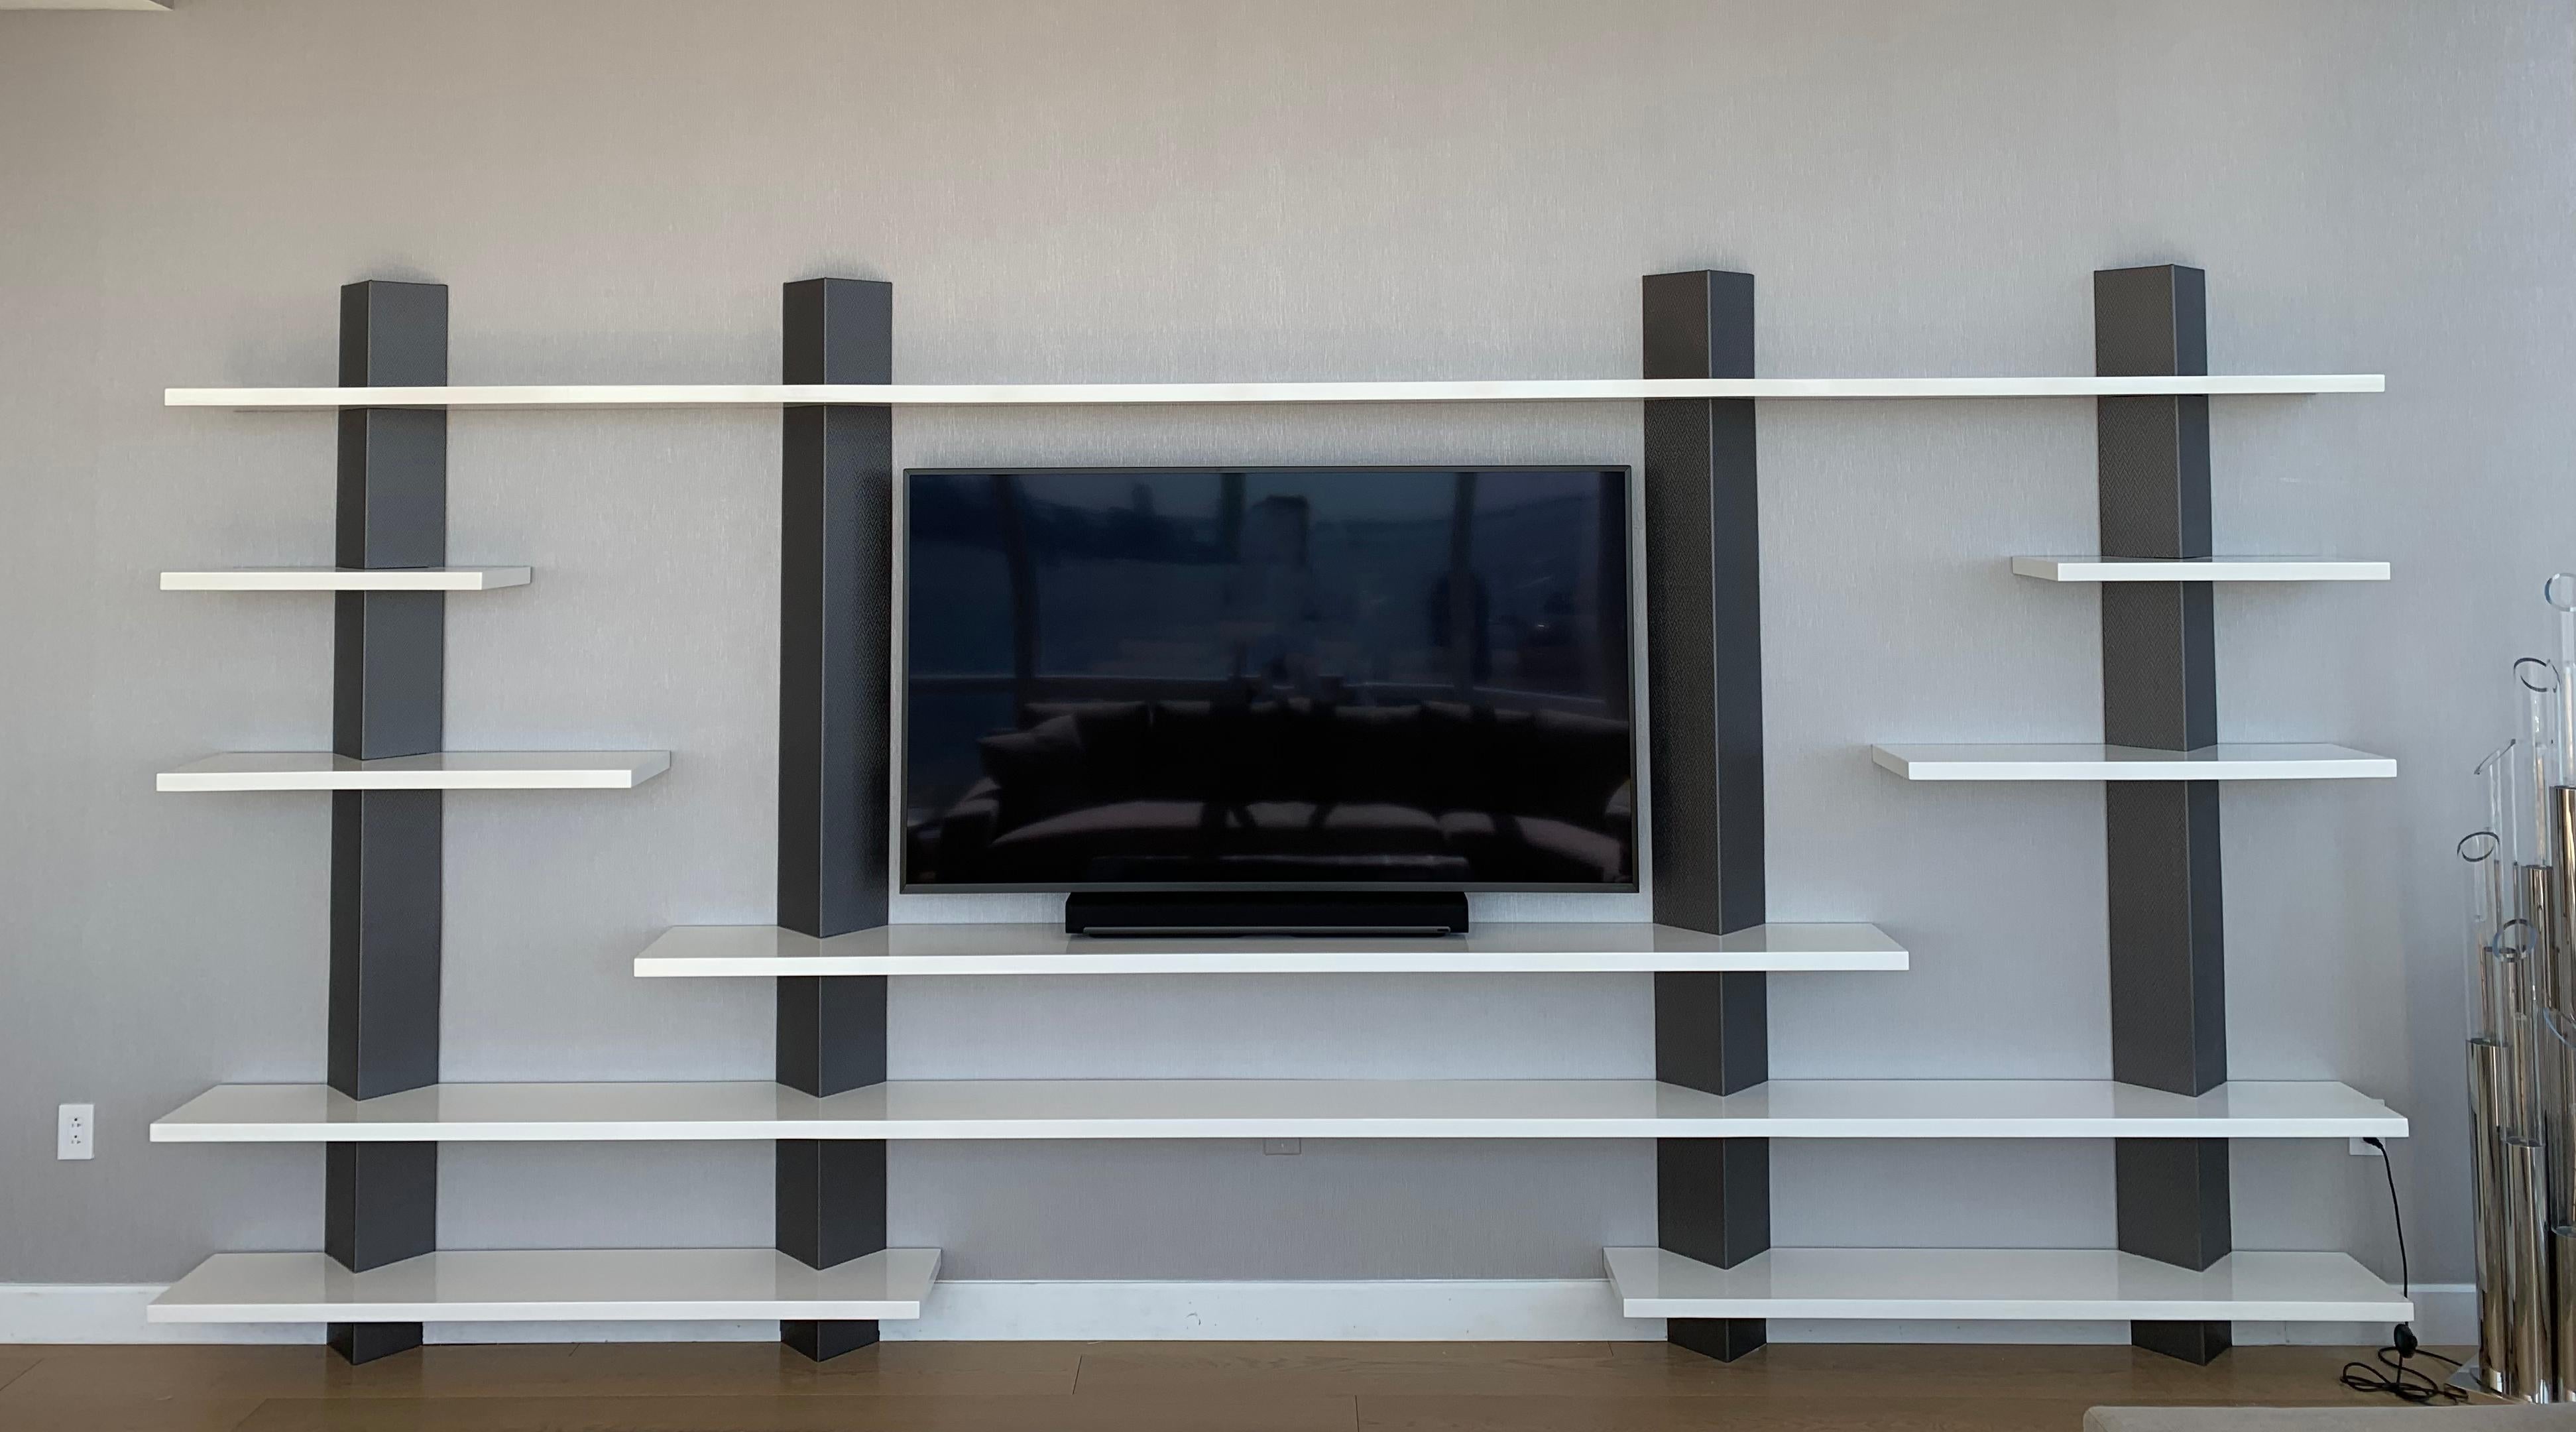 Our La Scalia shelving unit is a large custom built bookshelf with four pillars supporting floating shelves. Each pillar is wrapped in a textured vinyl that comes in five different color ways: Platinum, Silver, Rose Gold, Old Bronze and Iron. Each